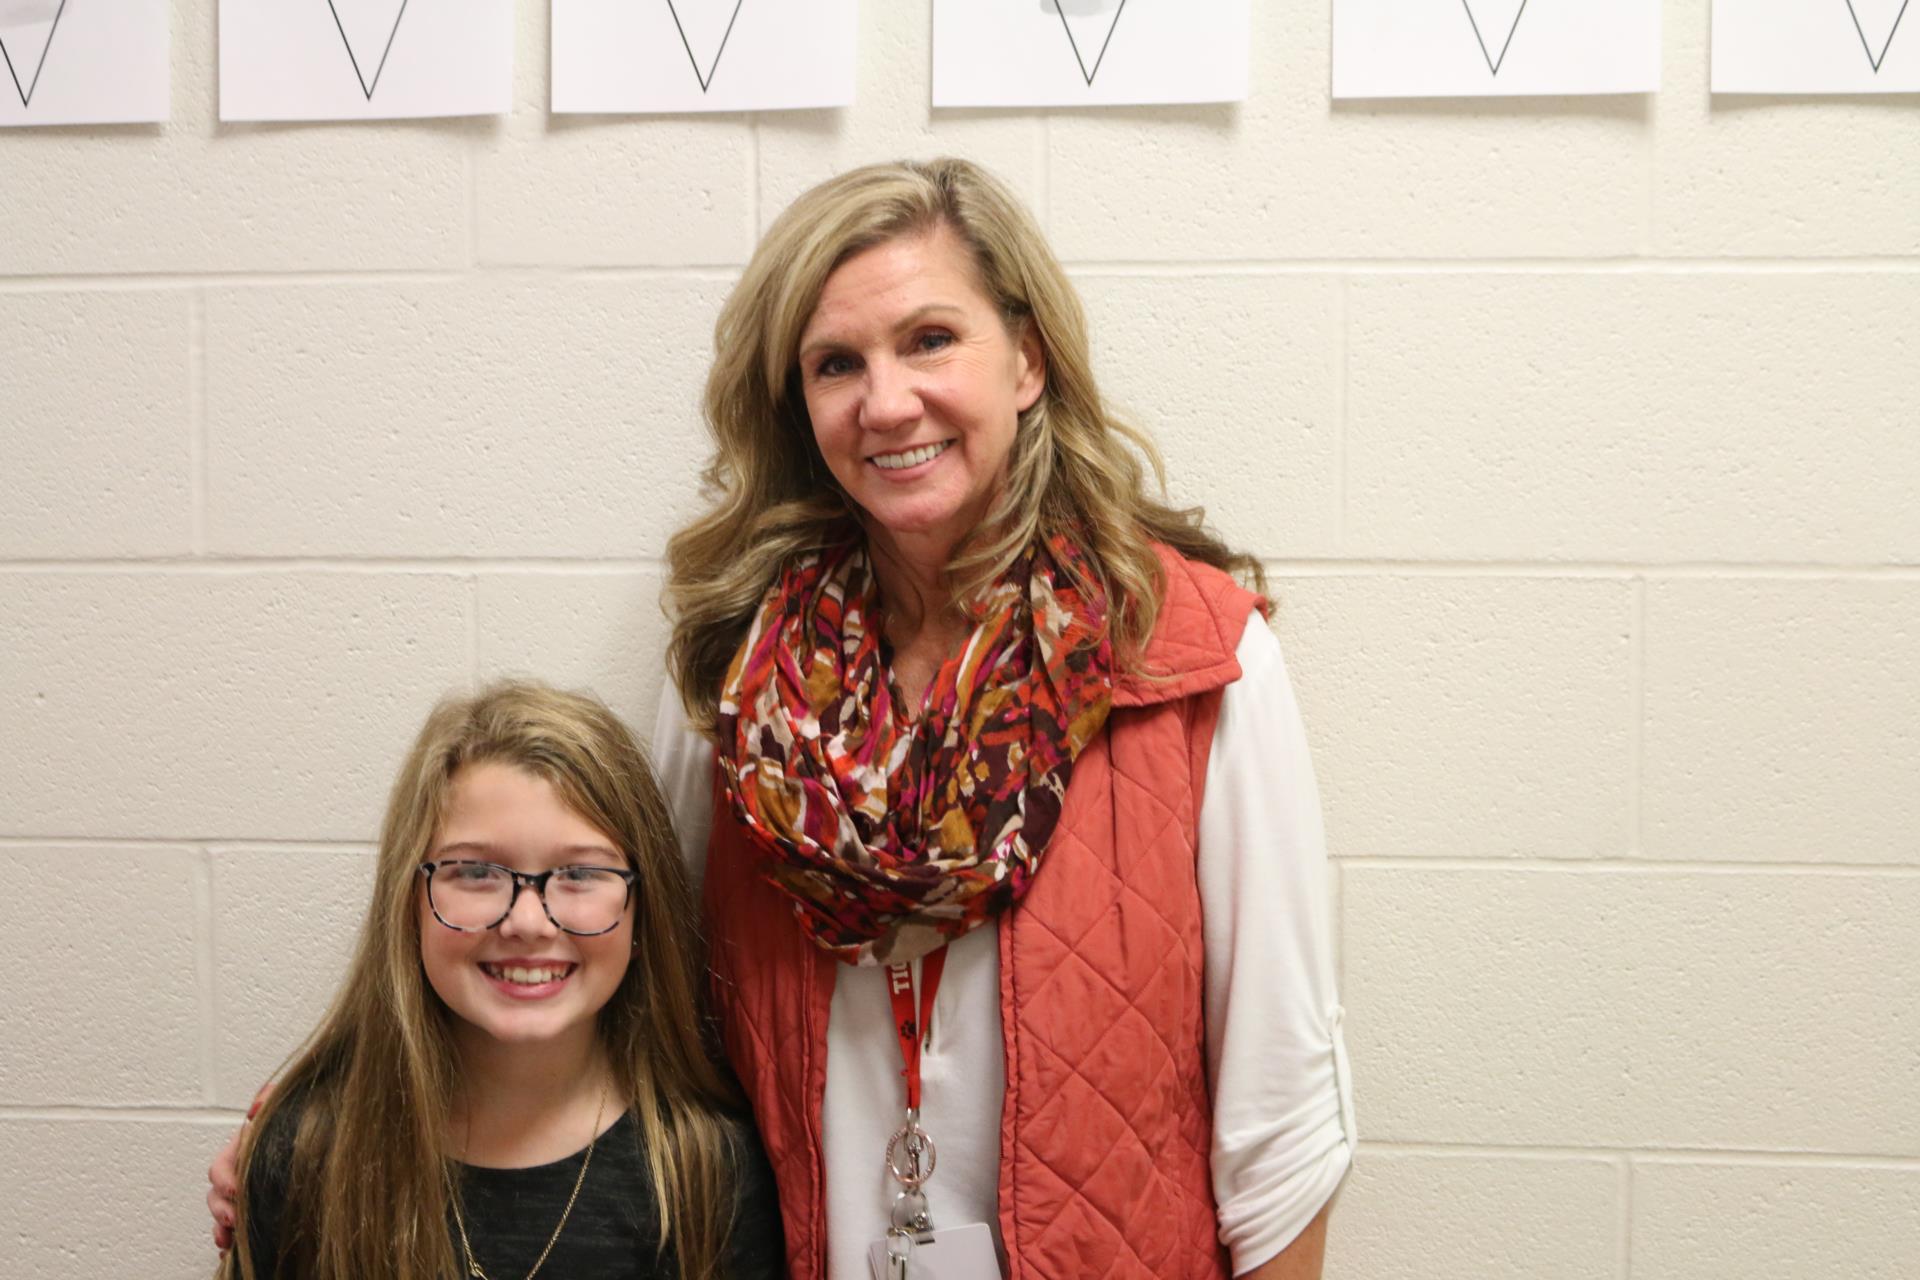 Mrs. Moats poses for a photo with winner Addy Powers